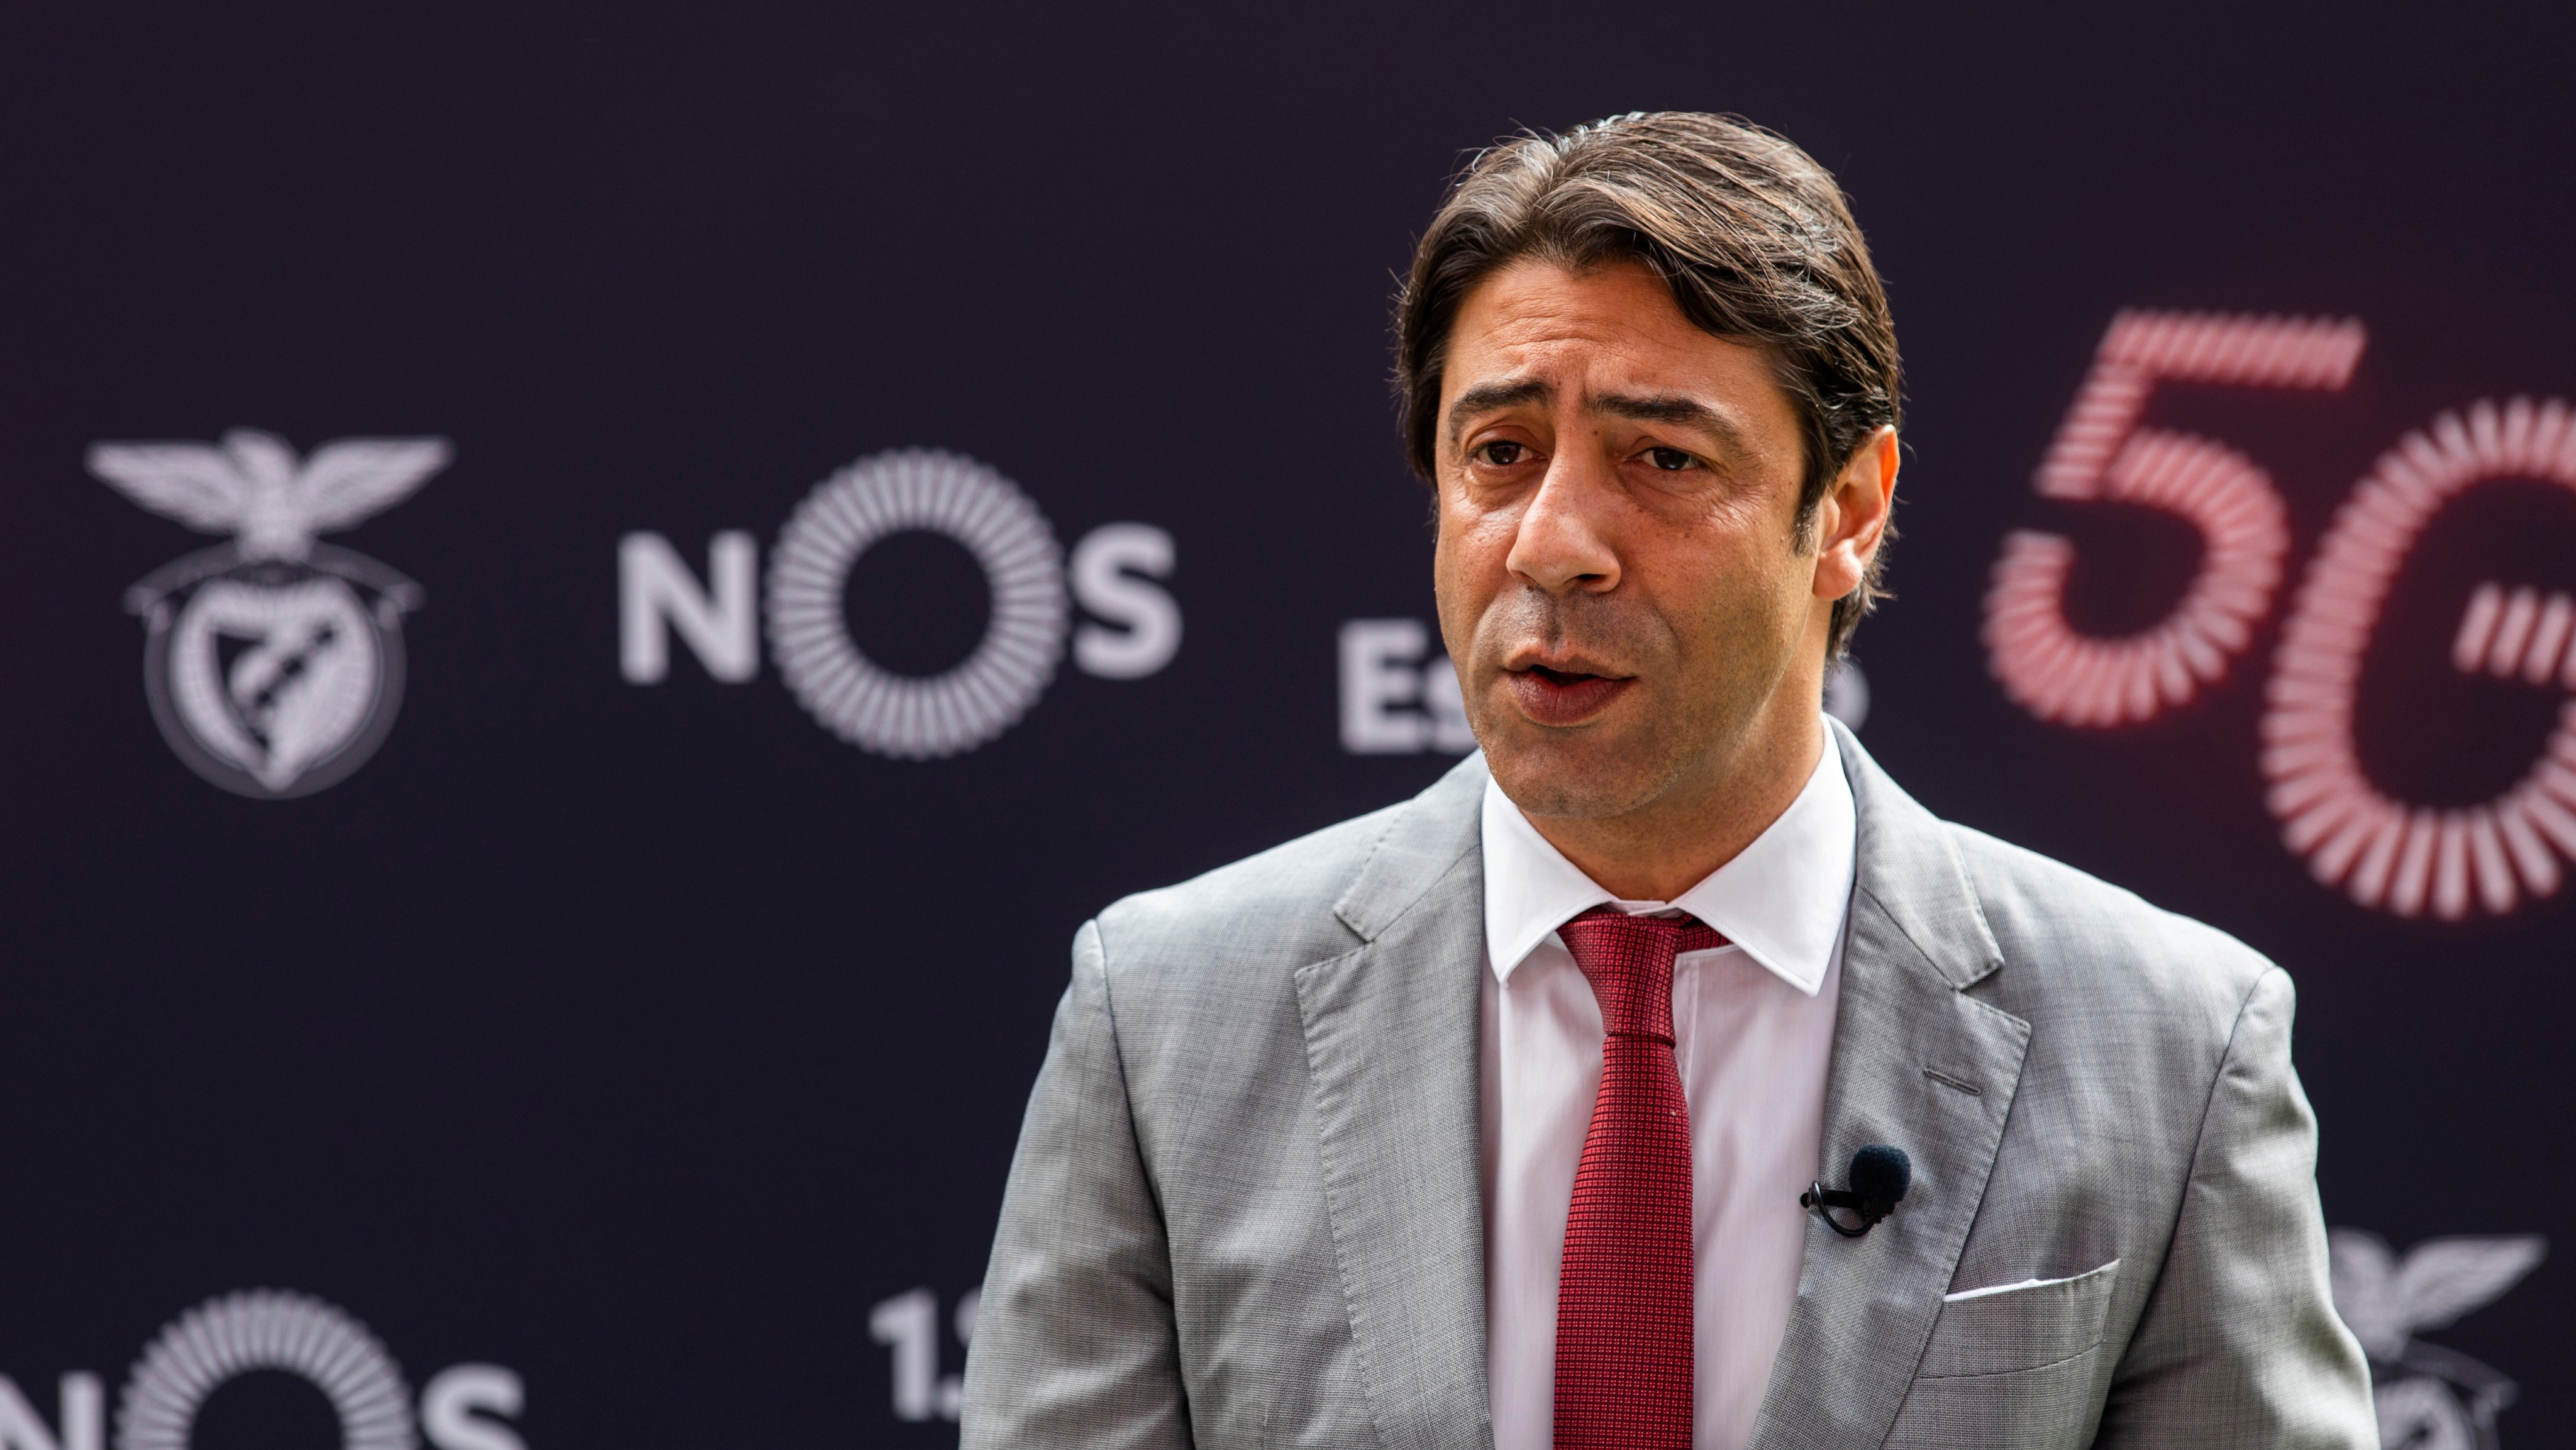 Rui Costa, Vice-President of SL Benfica speaks during a